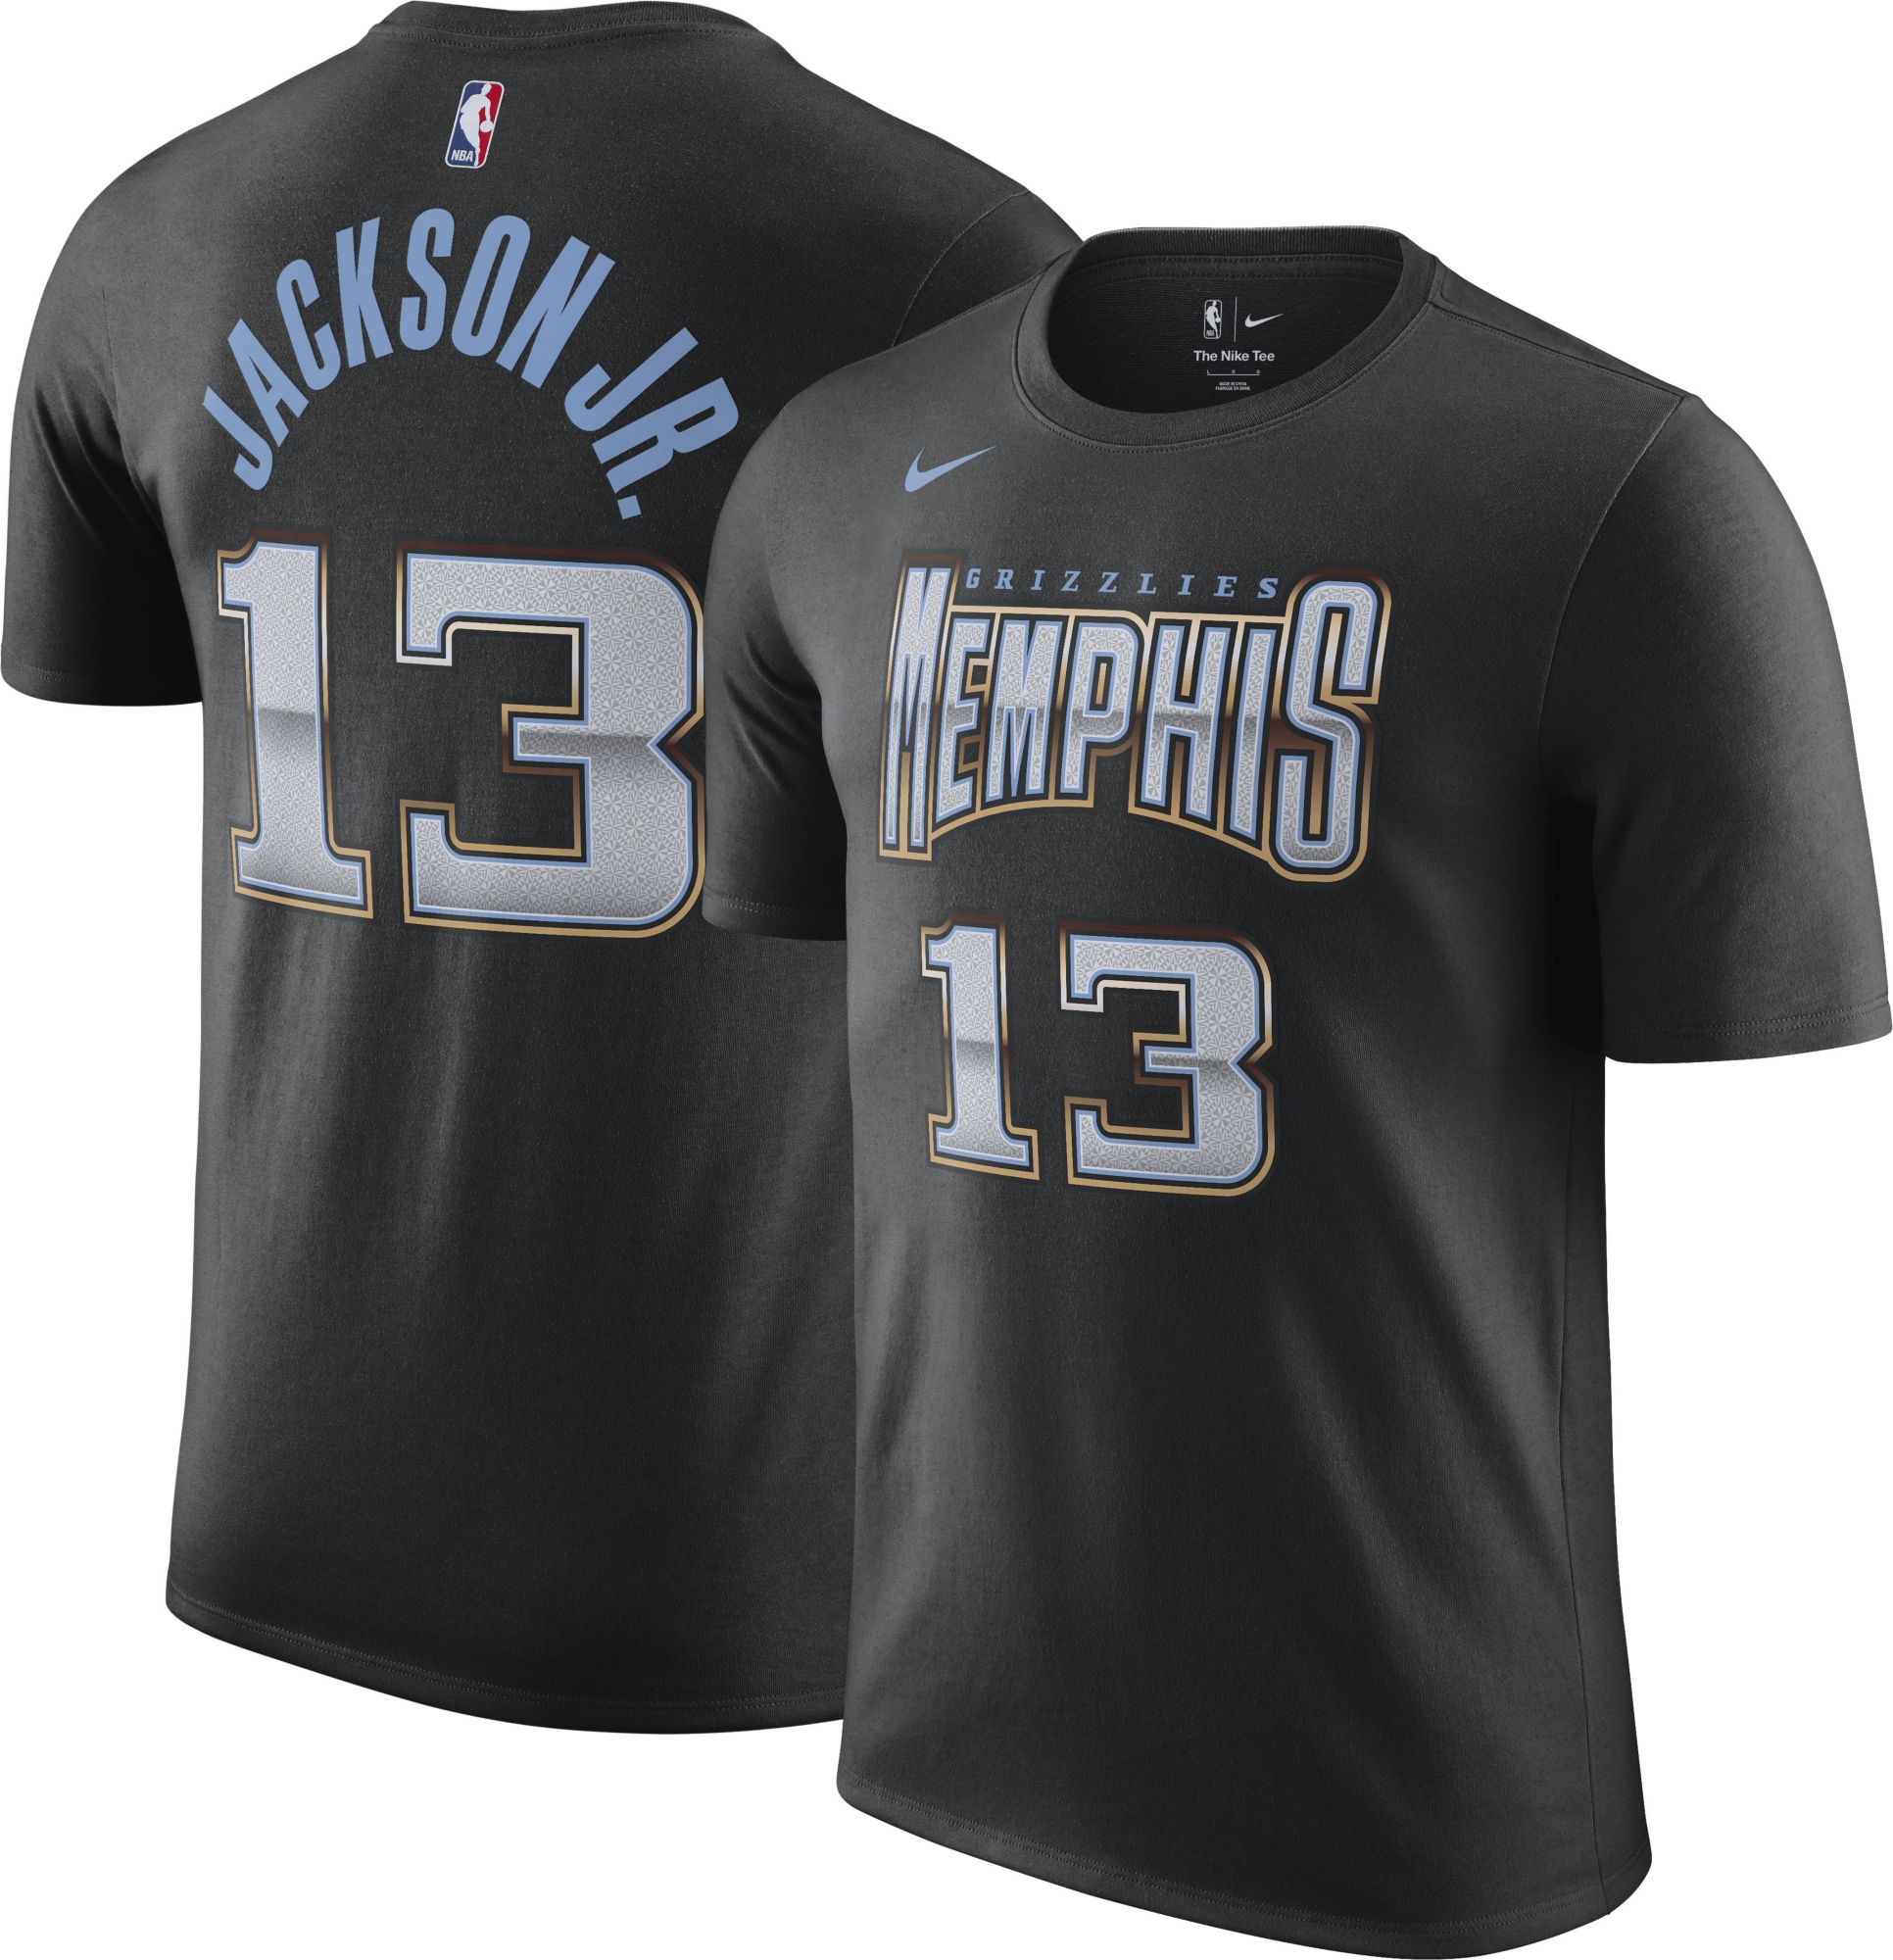 Nike Youth Memphis Grizzlies Ja Morant #12 Navy Dri-FIT Icon Jersey